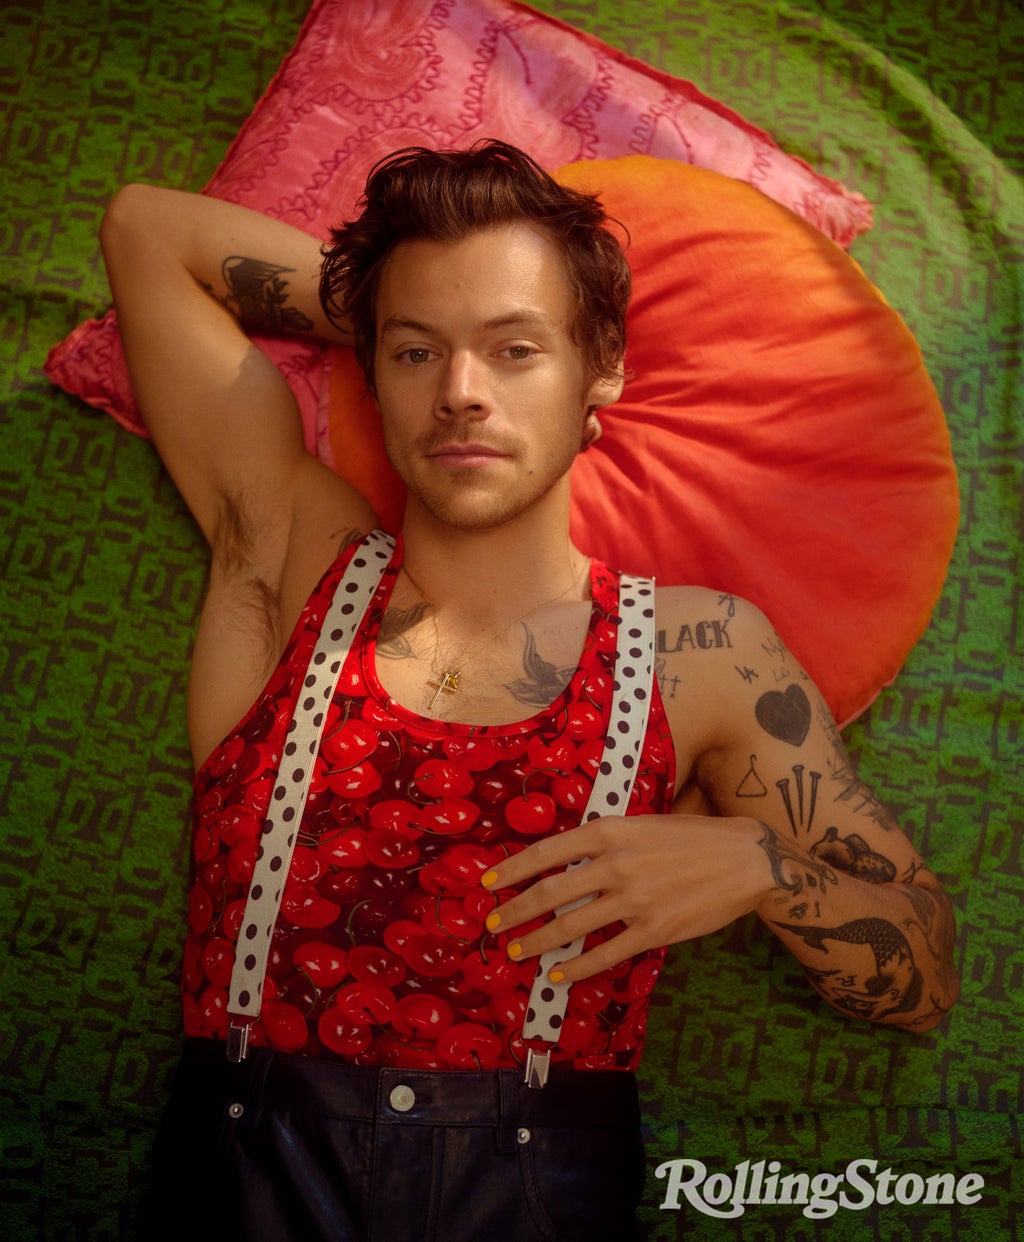 220506 RollingStones HarryStyles SHOT 04 0070 RGB?width=1024&height=1024&fit=cover&auto=webp